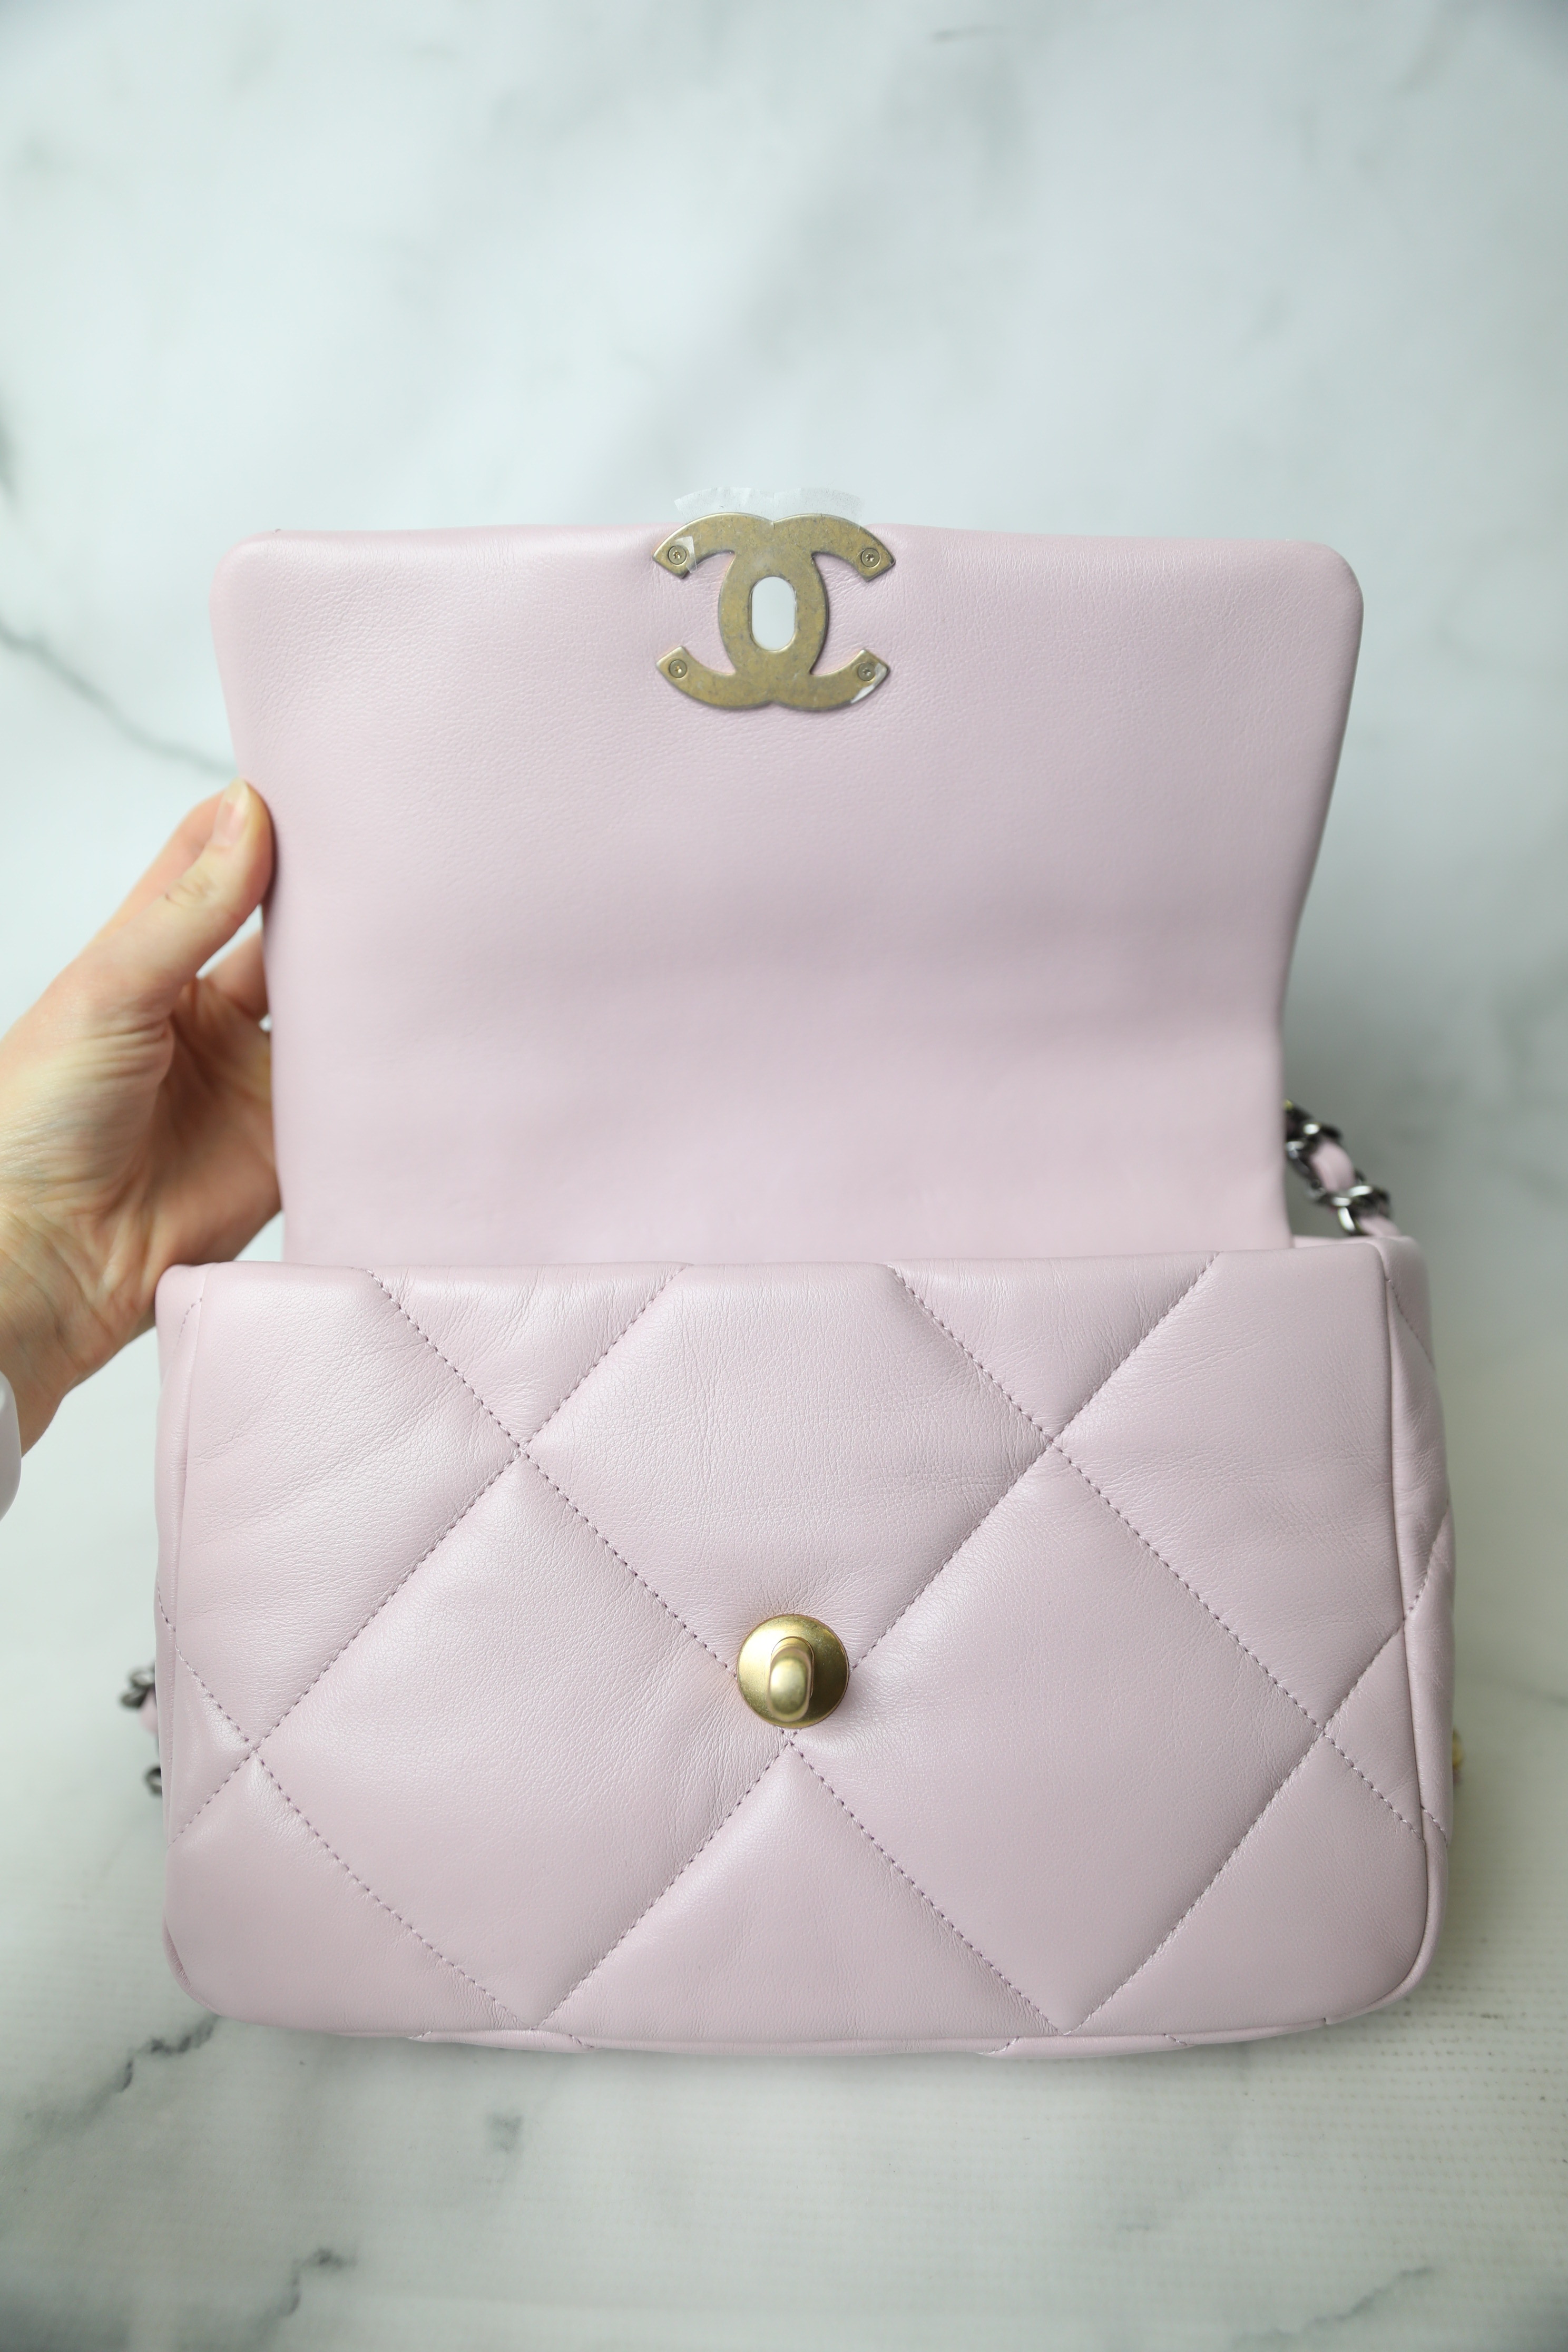 Chanel Classic Medium Double Flap, Neon Hot Pink Lambskin Leather with  Silver Hardware, Preowned In Box GA001